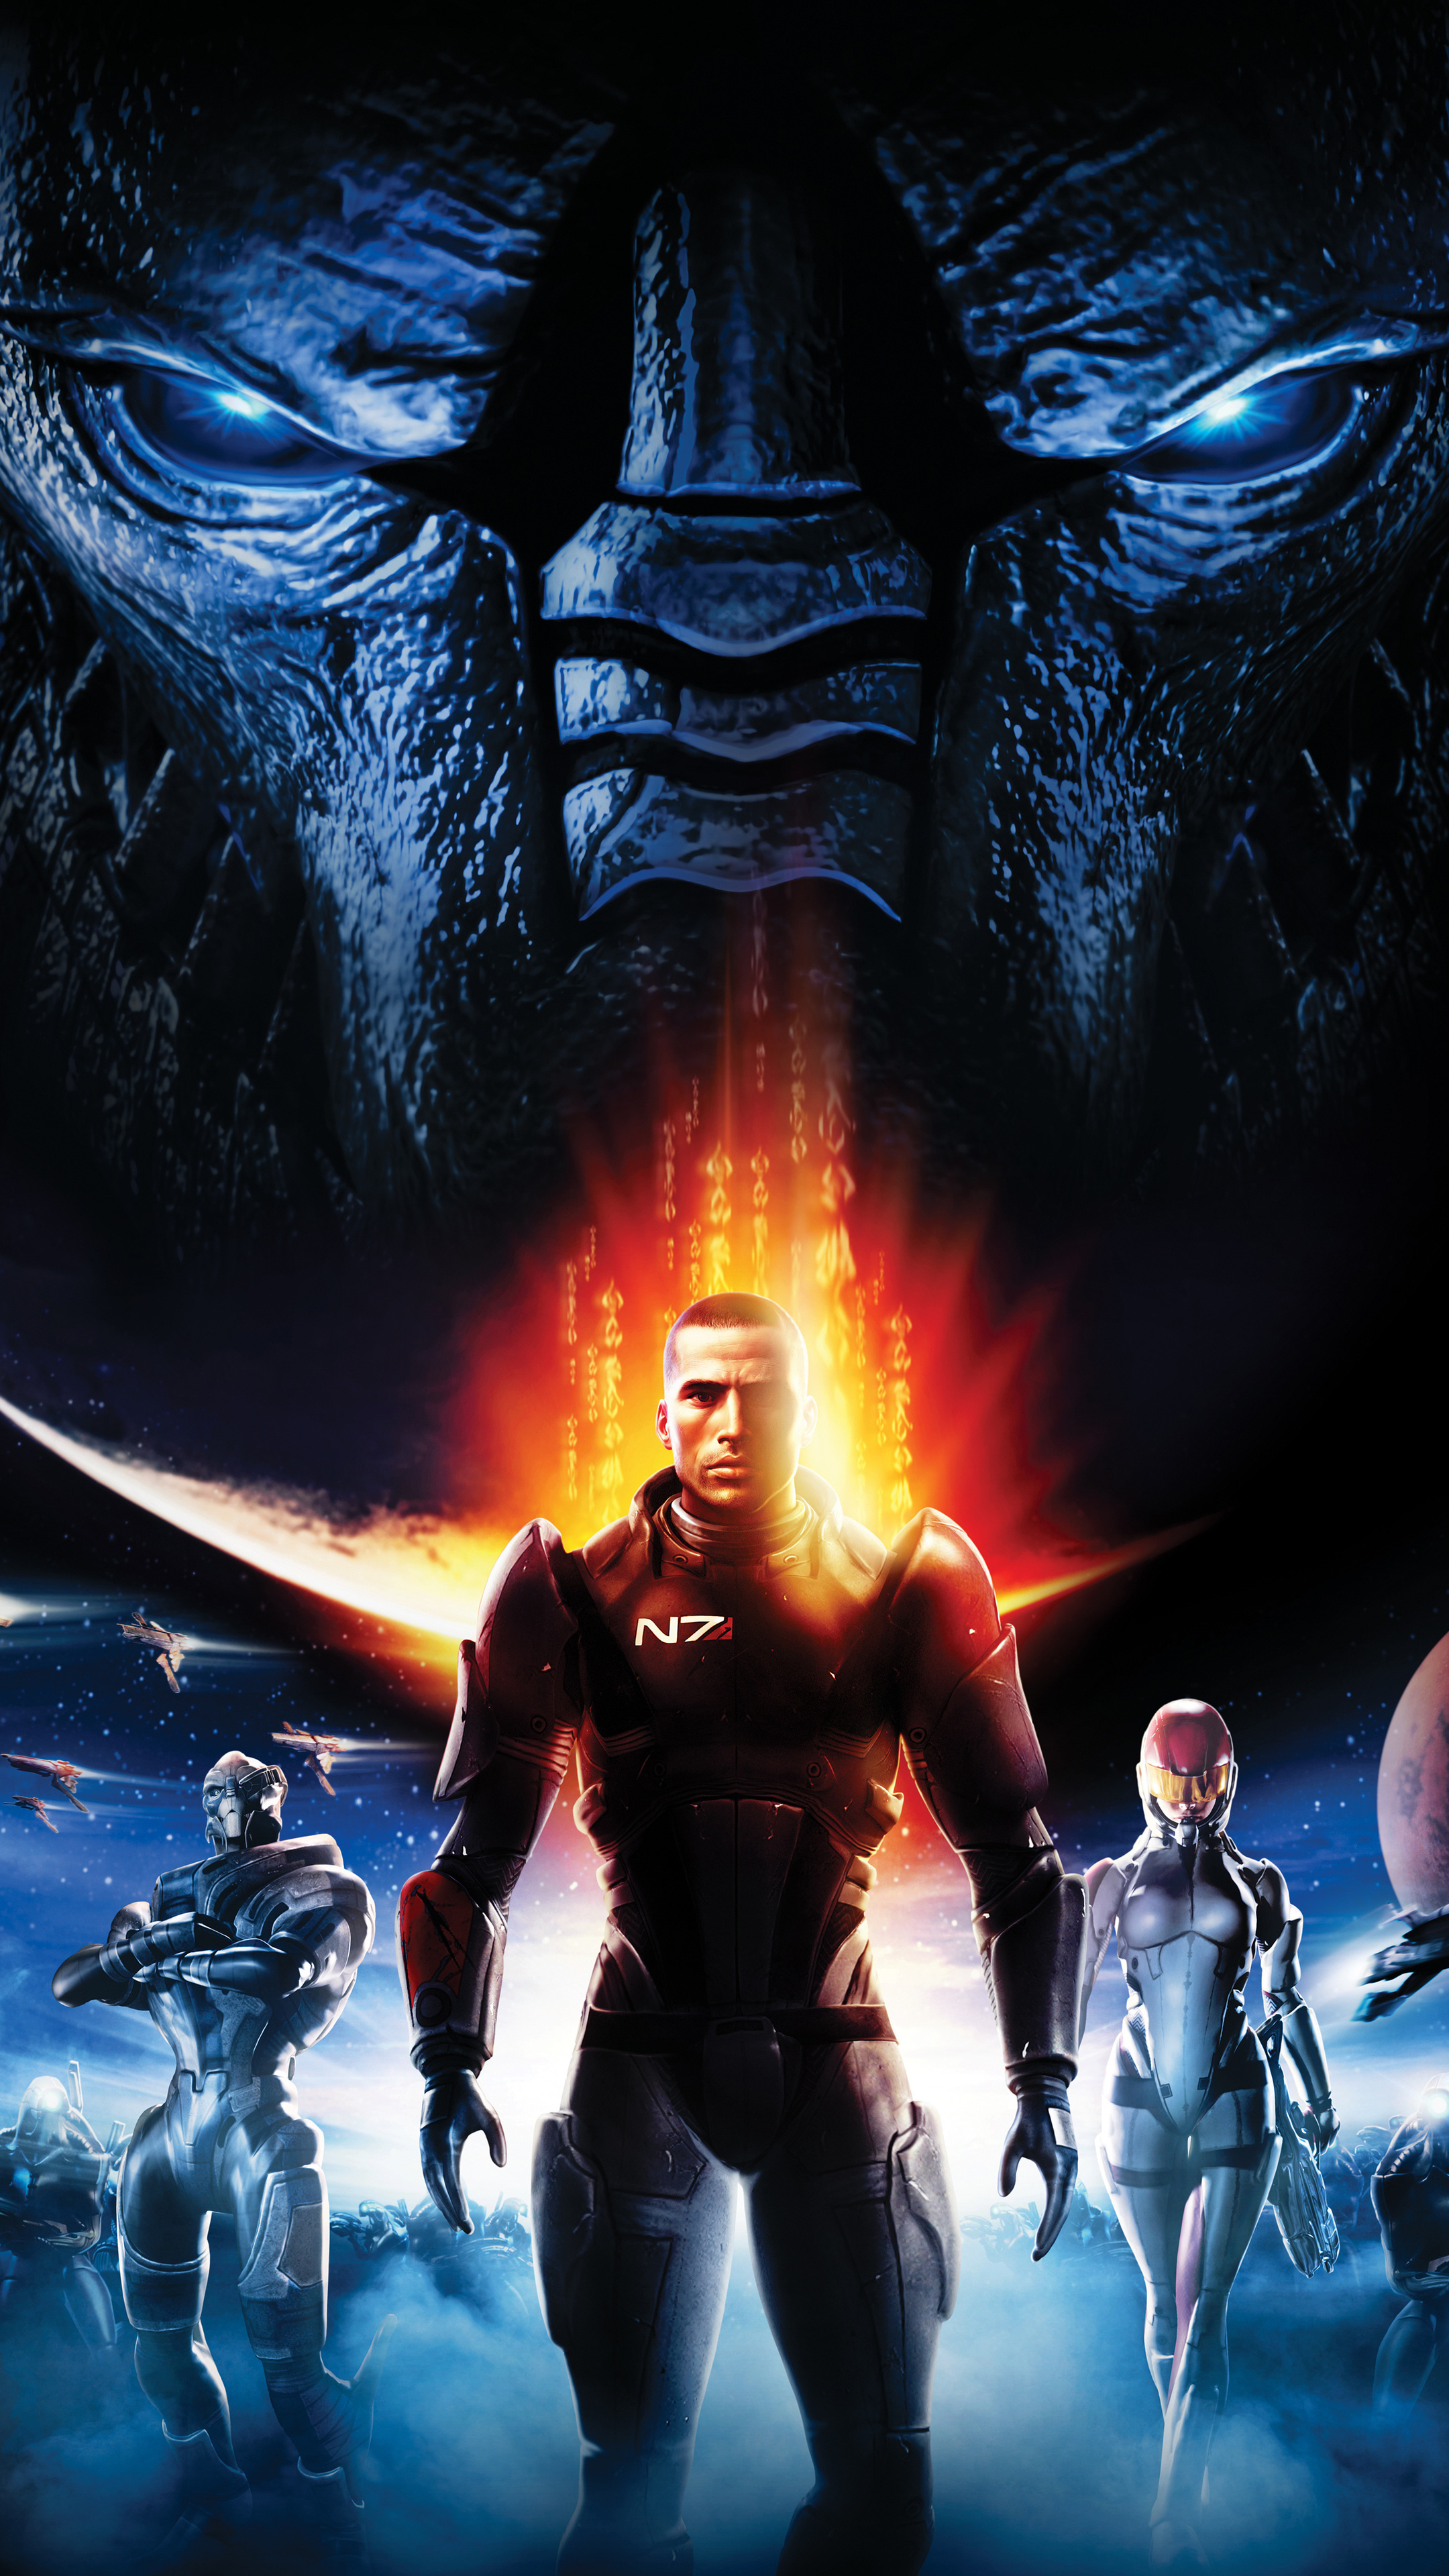 Mass Effect, Classic 8K wallpapers, Sony Xperia HD, Nostalgic gaming vibes, 2160x3840 4K Handy